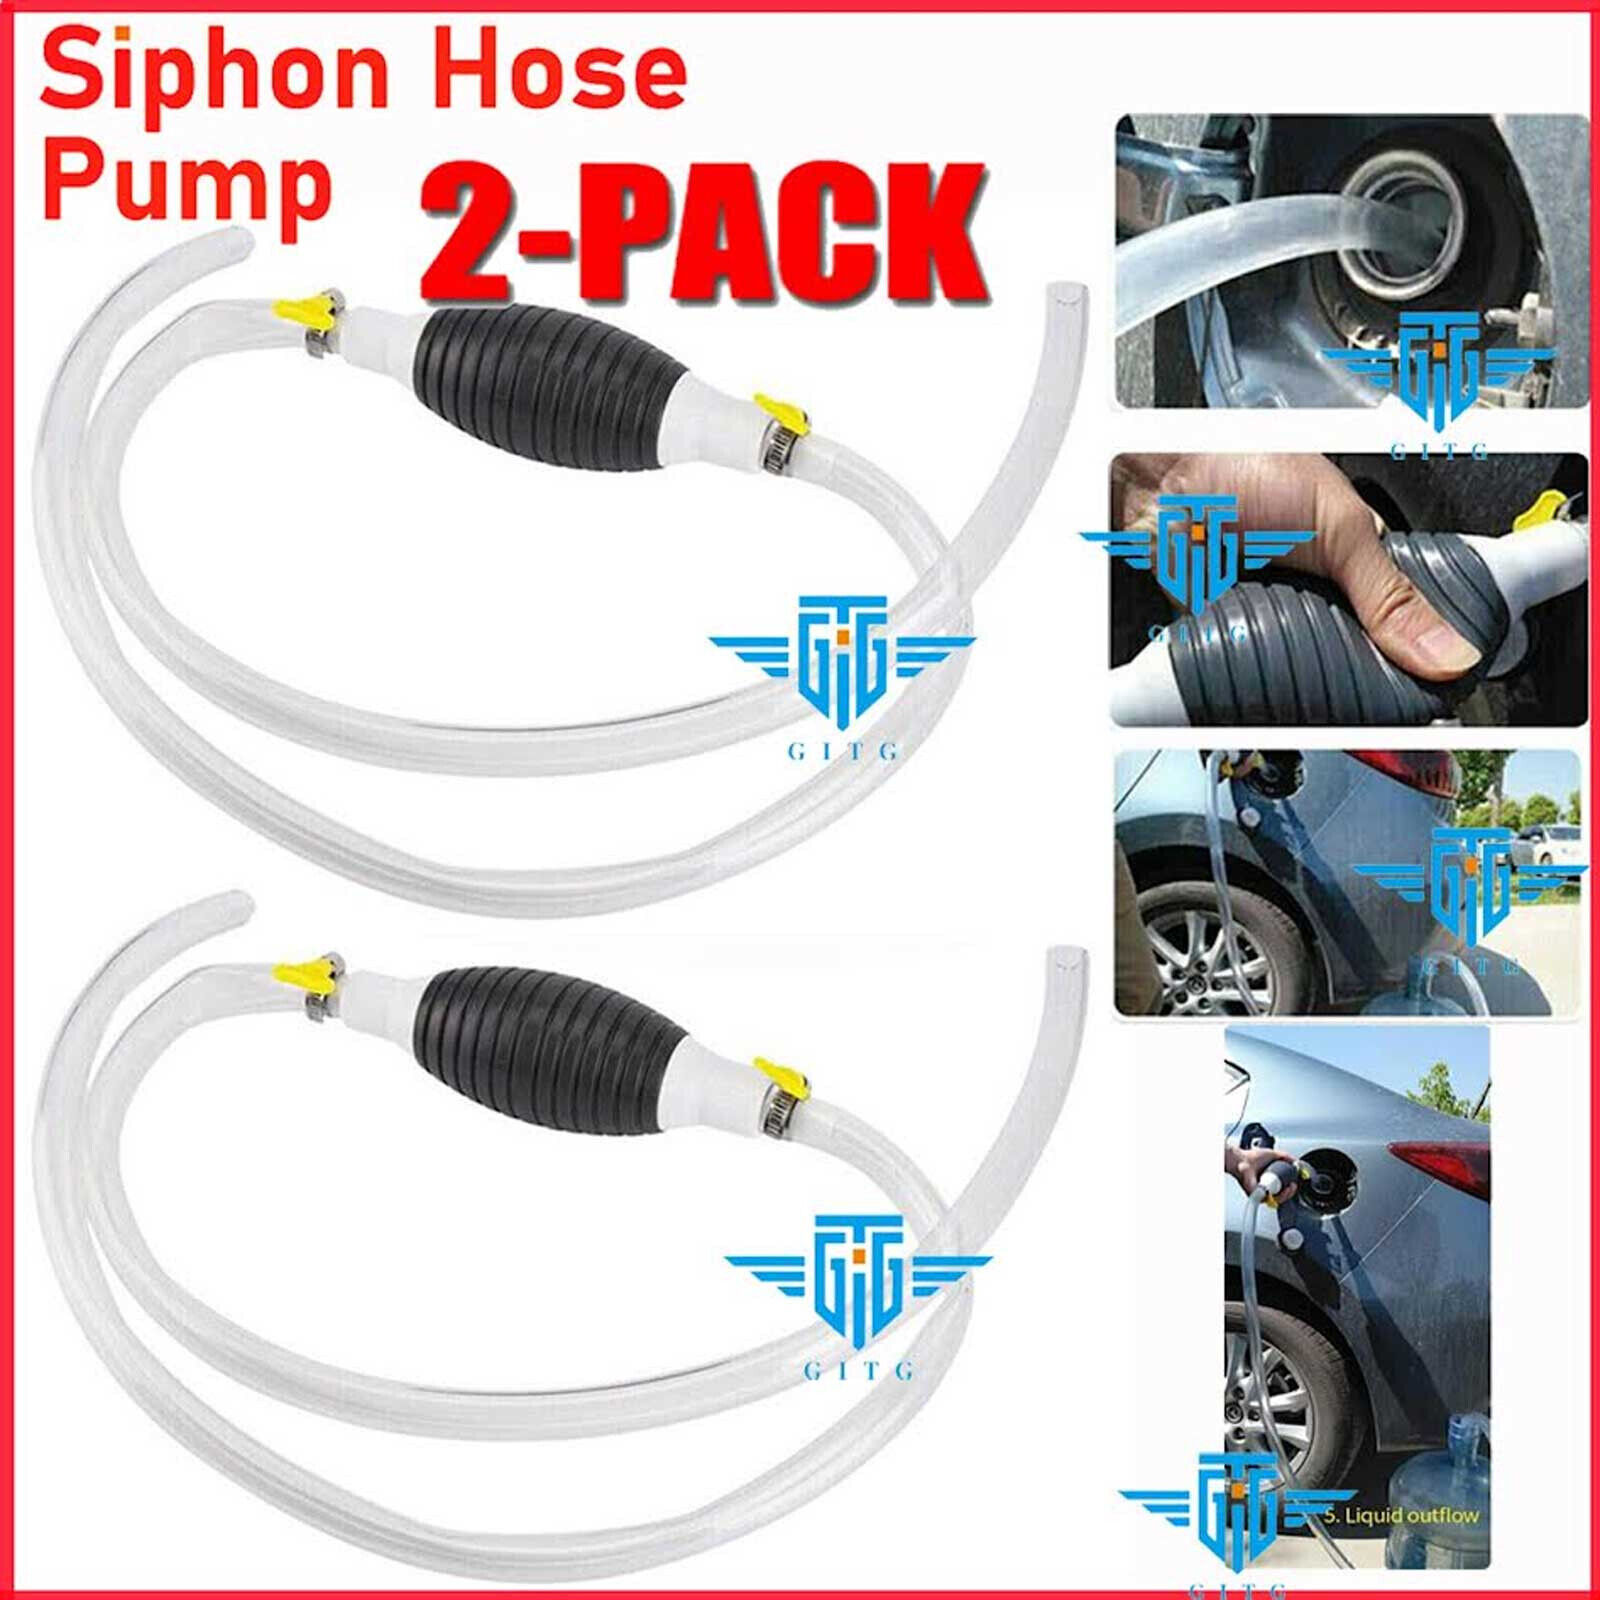 2X Siphon Pump Gas Transfer Gasoline Siphone Hose Oil Water Fuel Transfer Hand